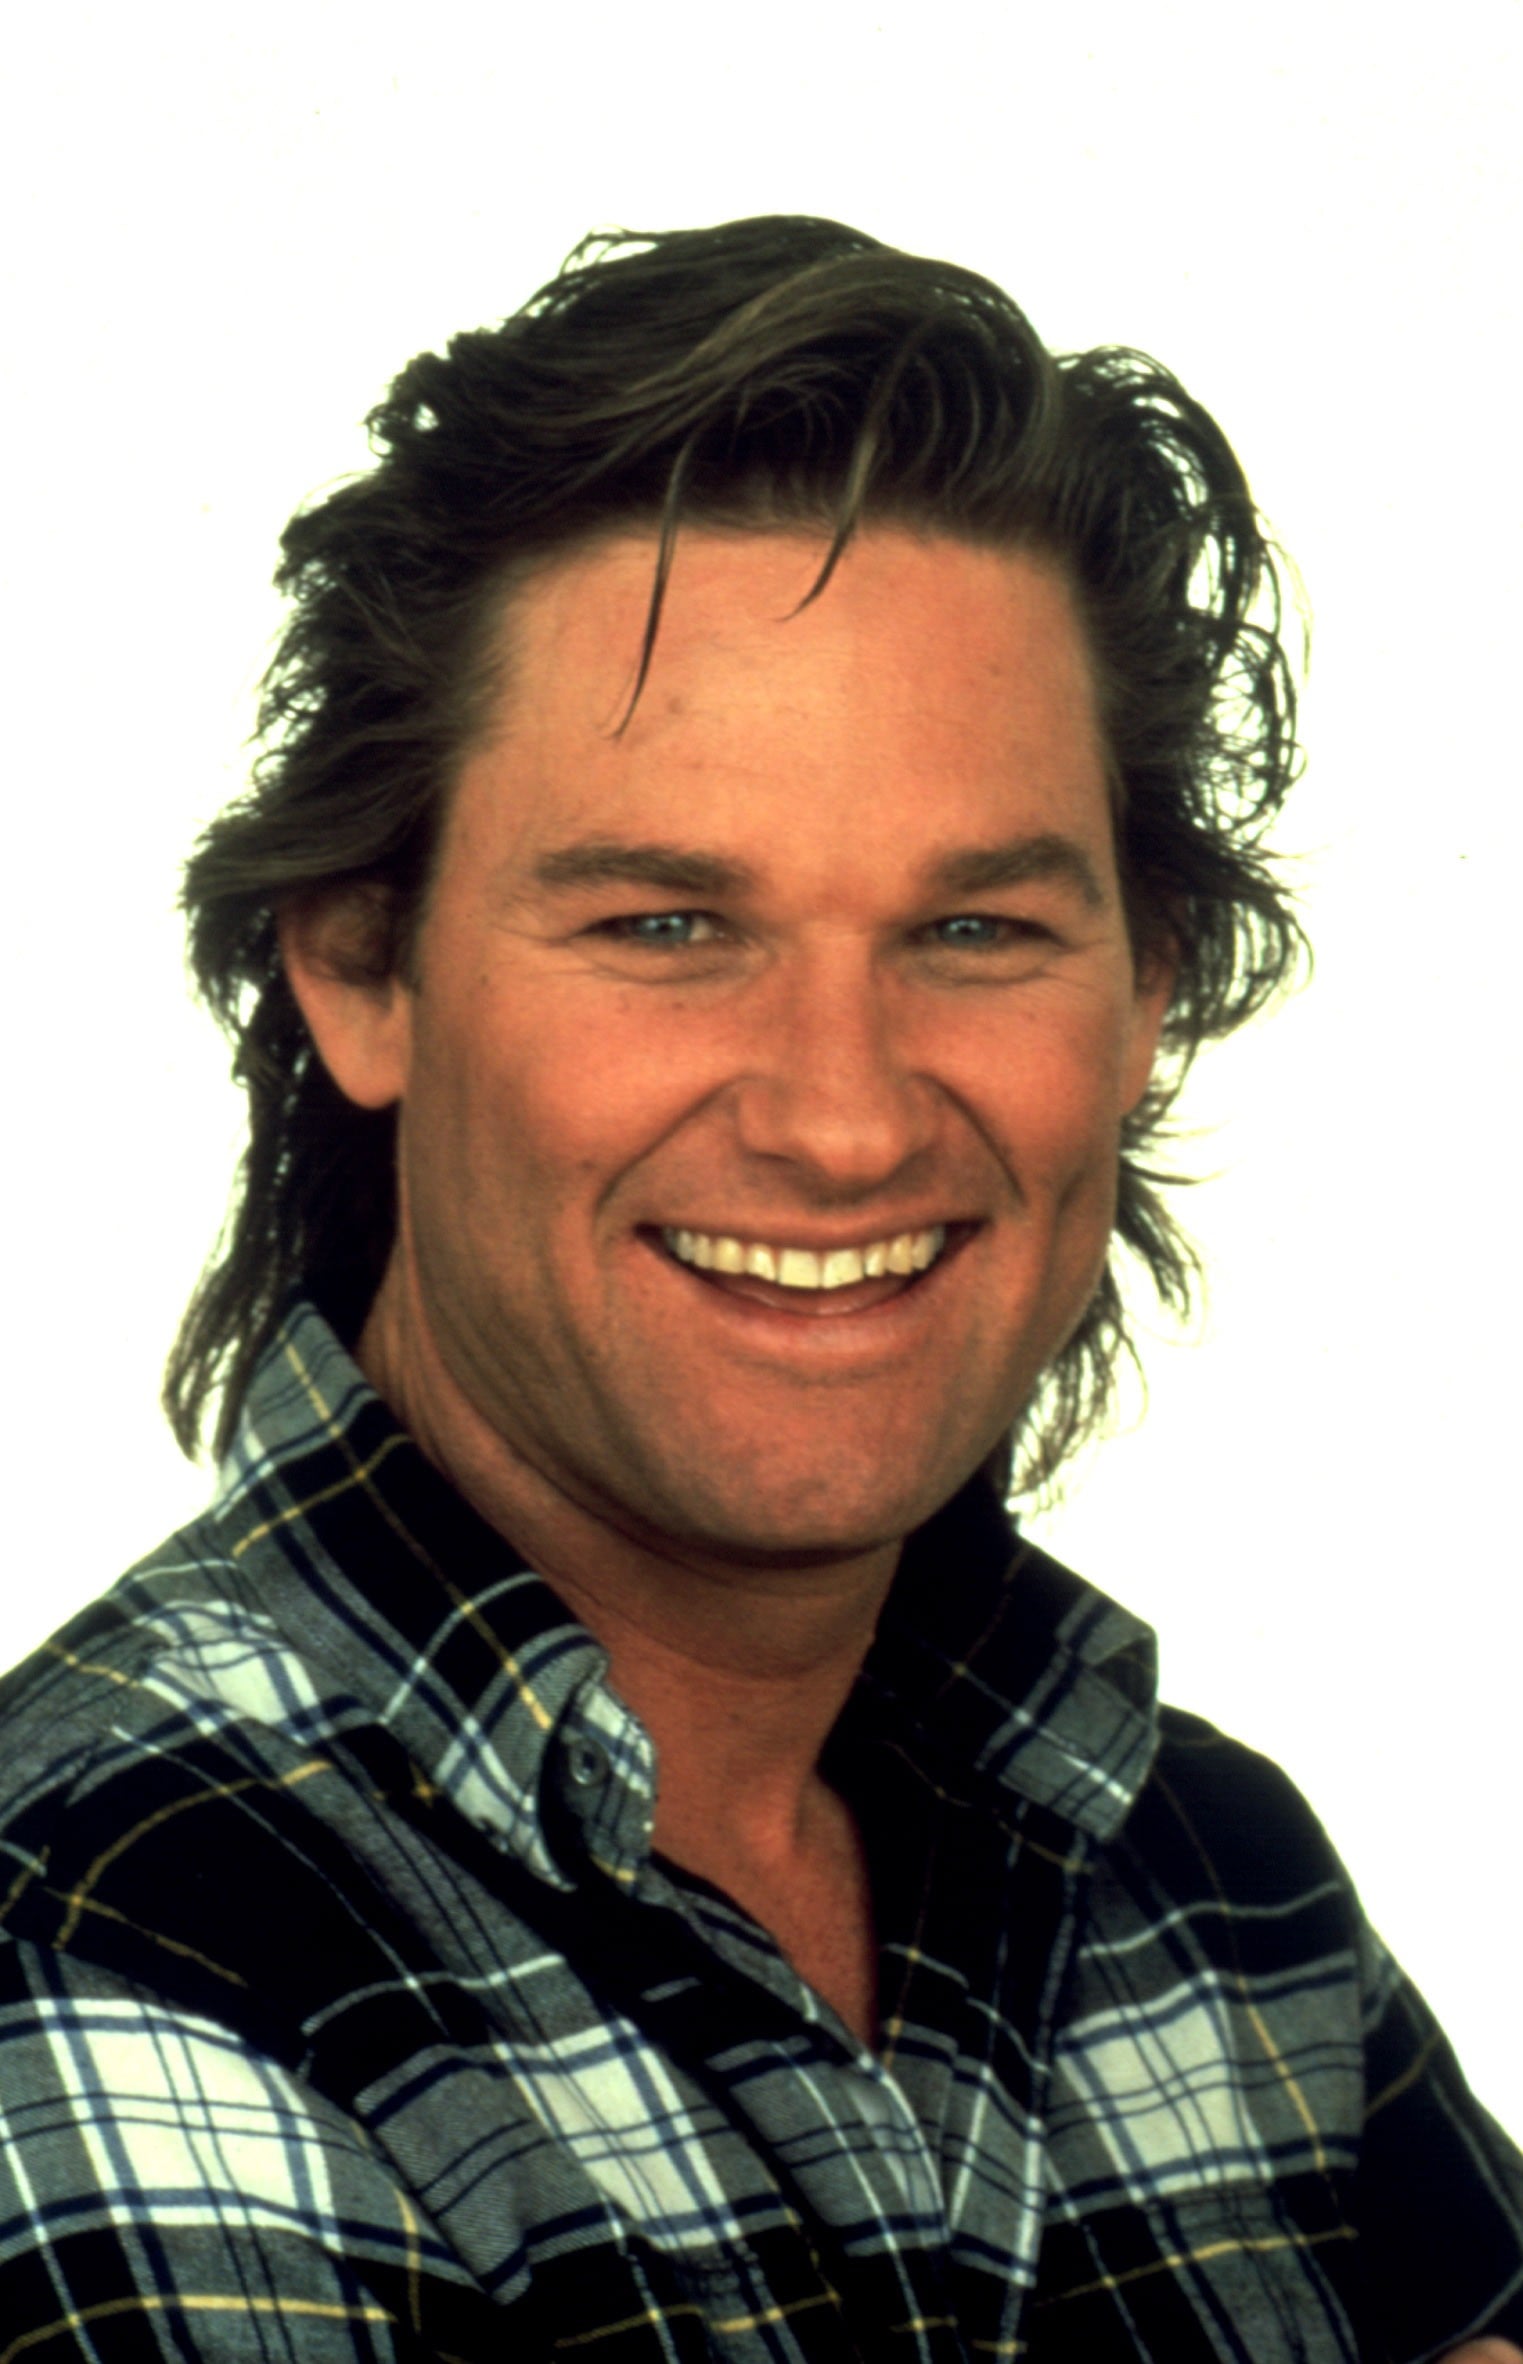 kurt russell young years